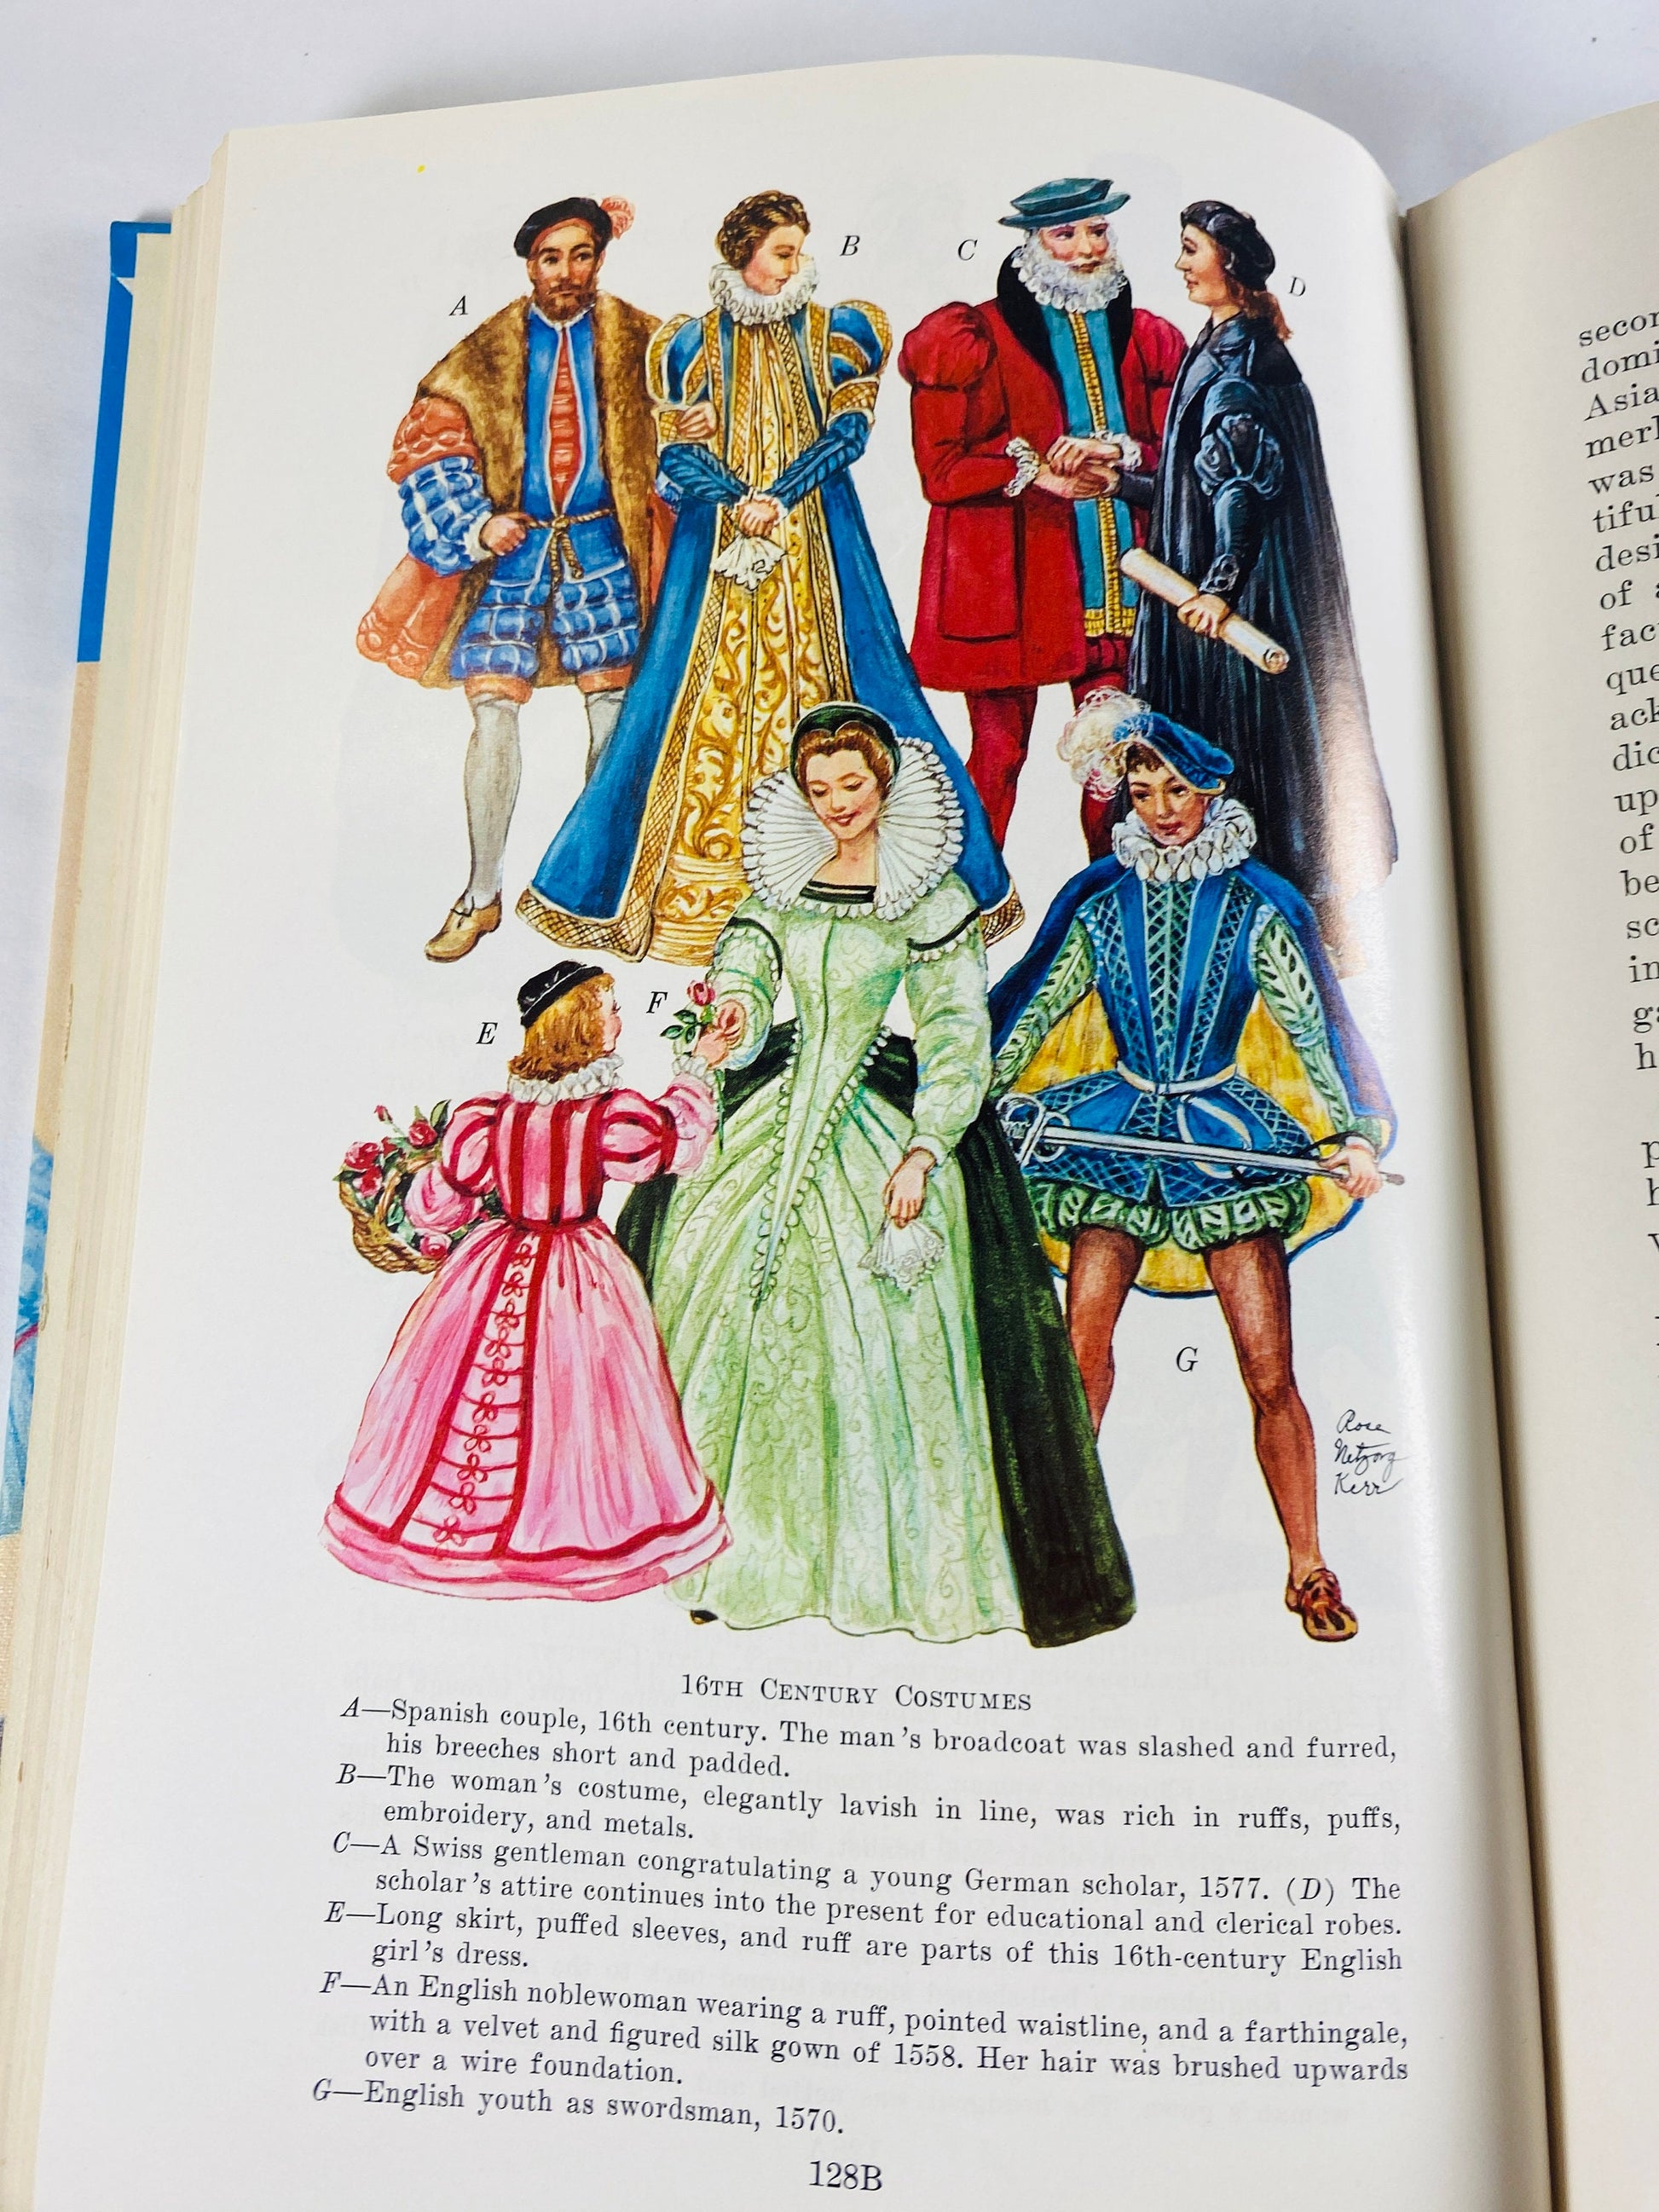 Historic Costume vintage design book by Lester & Kerr circa 1967 Fashion and style from remote times to 1960s Gothic Renaissance Elizabethan